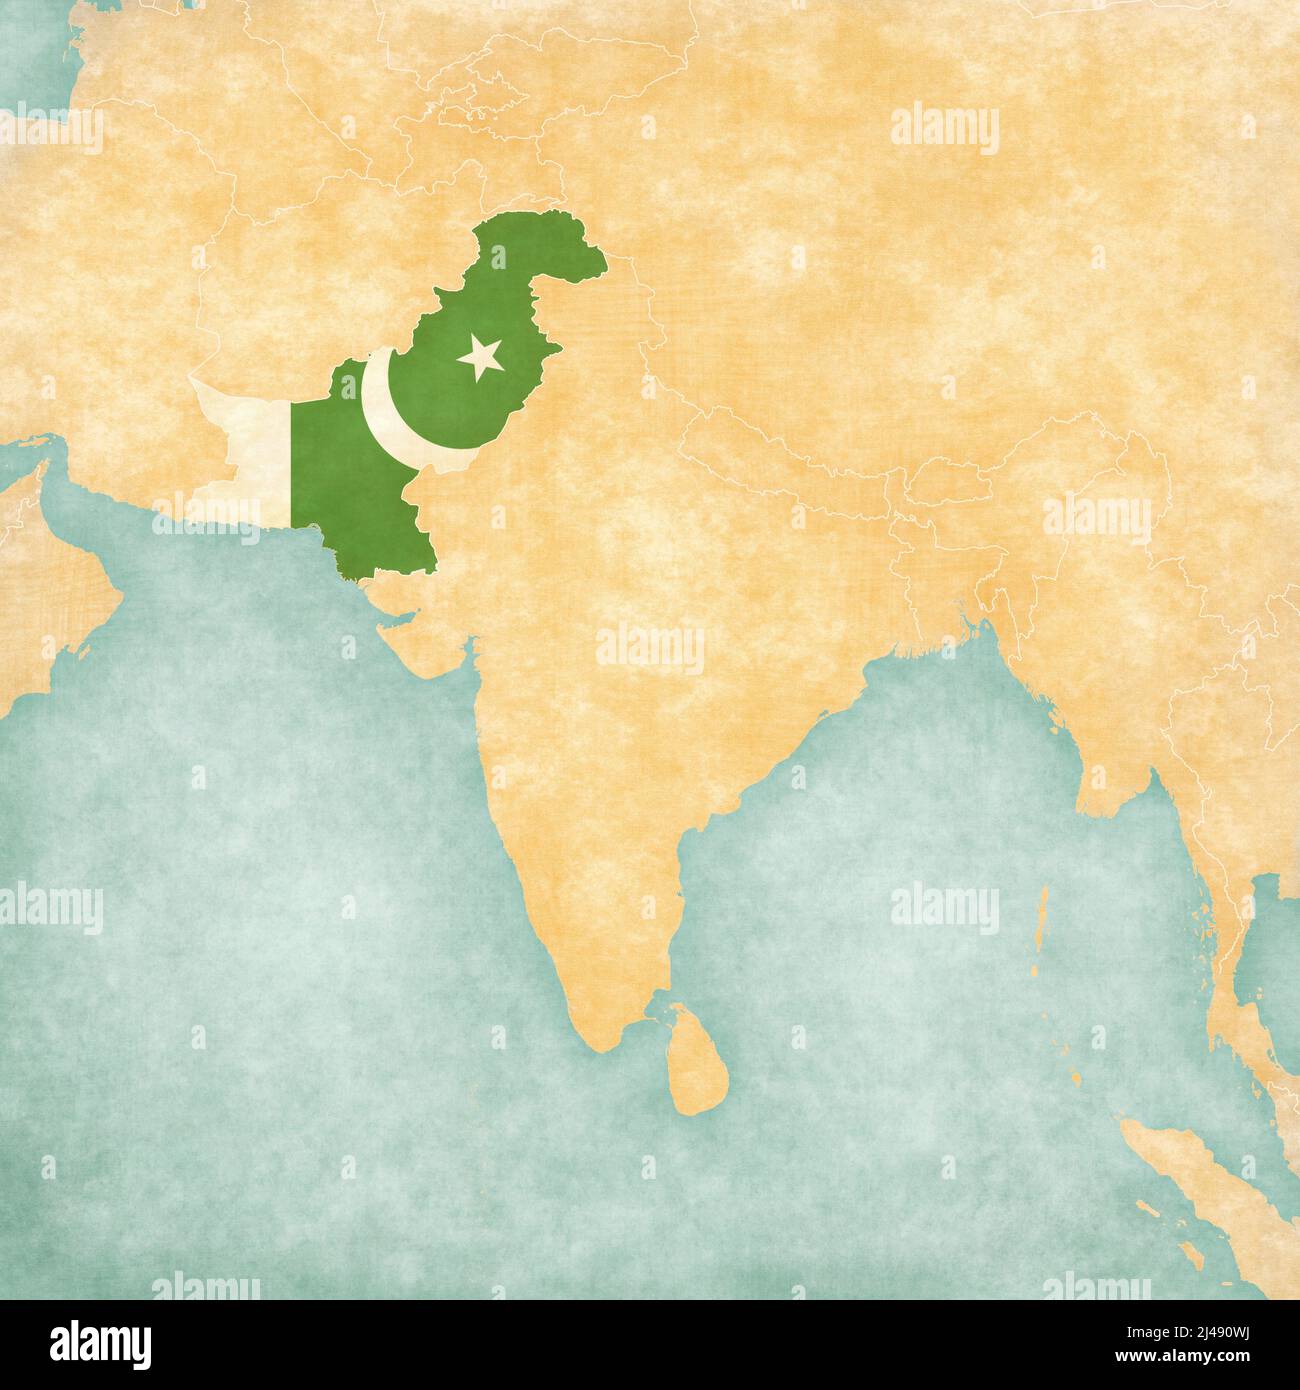 Pakistan (Pakistani flag) on the map of South Asia in soft grunge and vintage style, like old paper with watercolor painting. Stock Photo